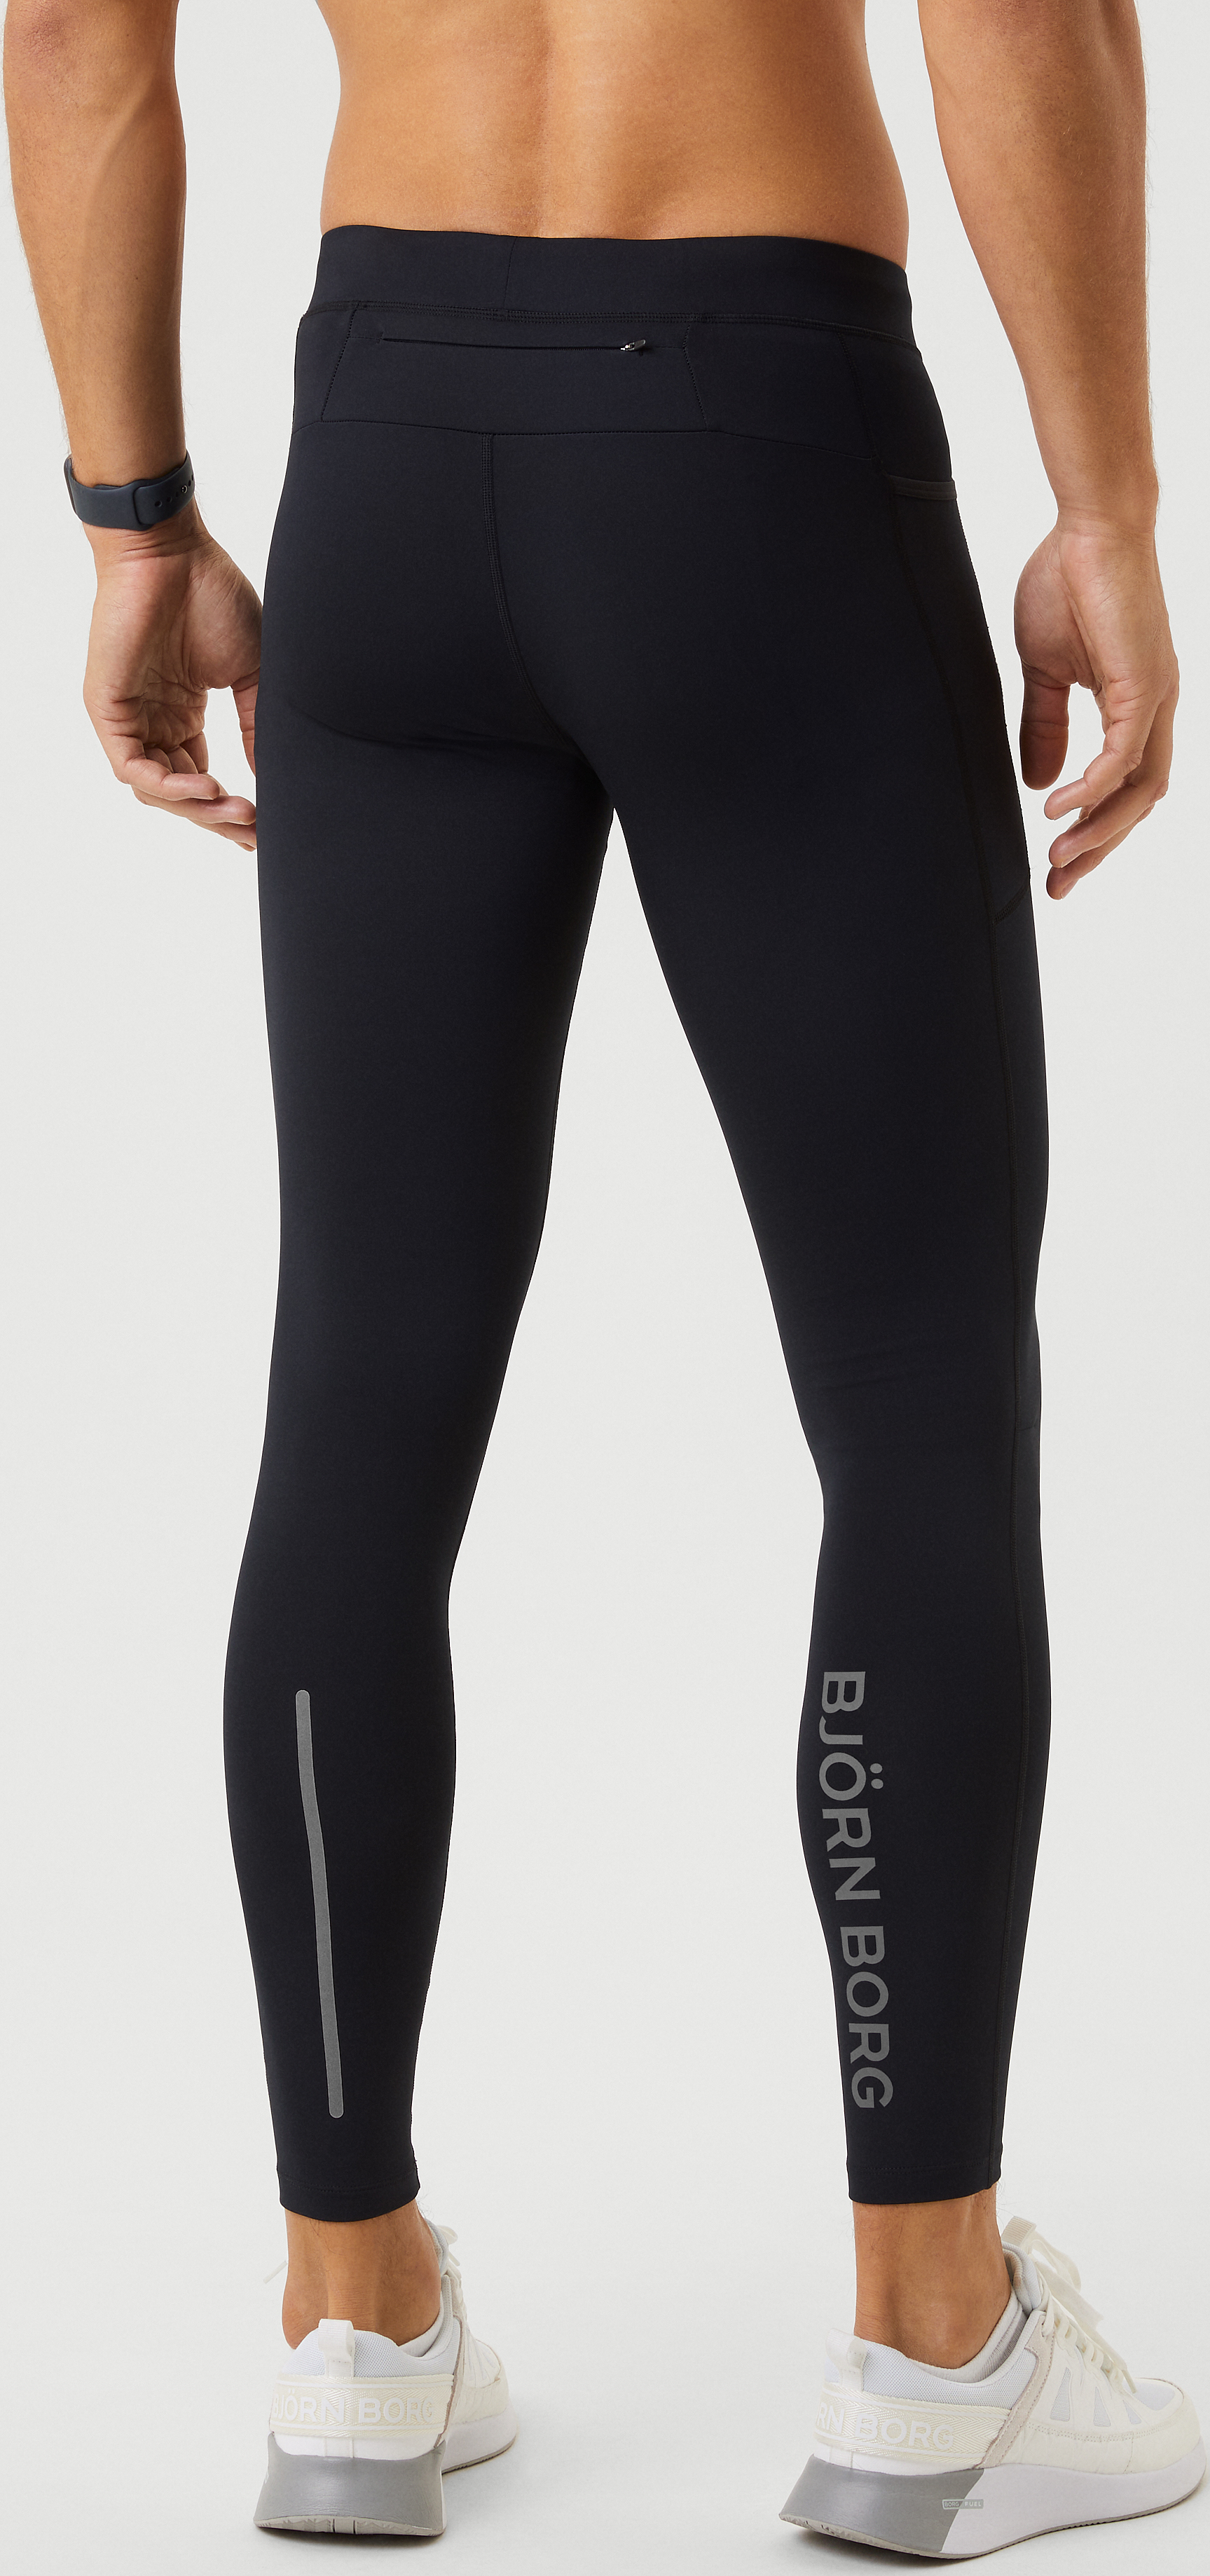 Men's Winter Warm Pro Tights | The North Face